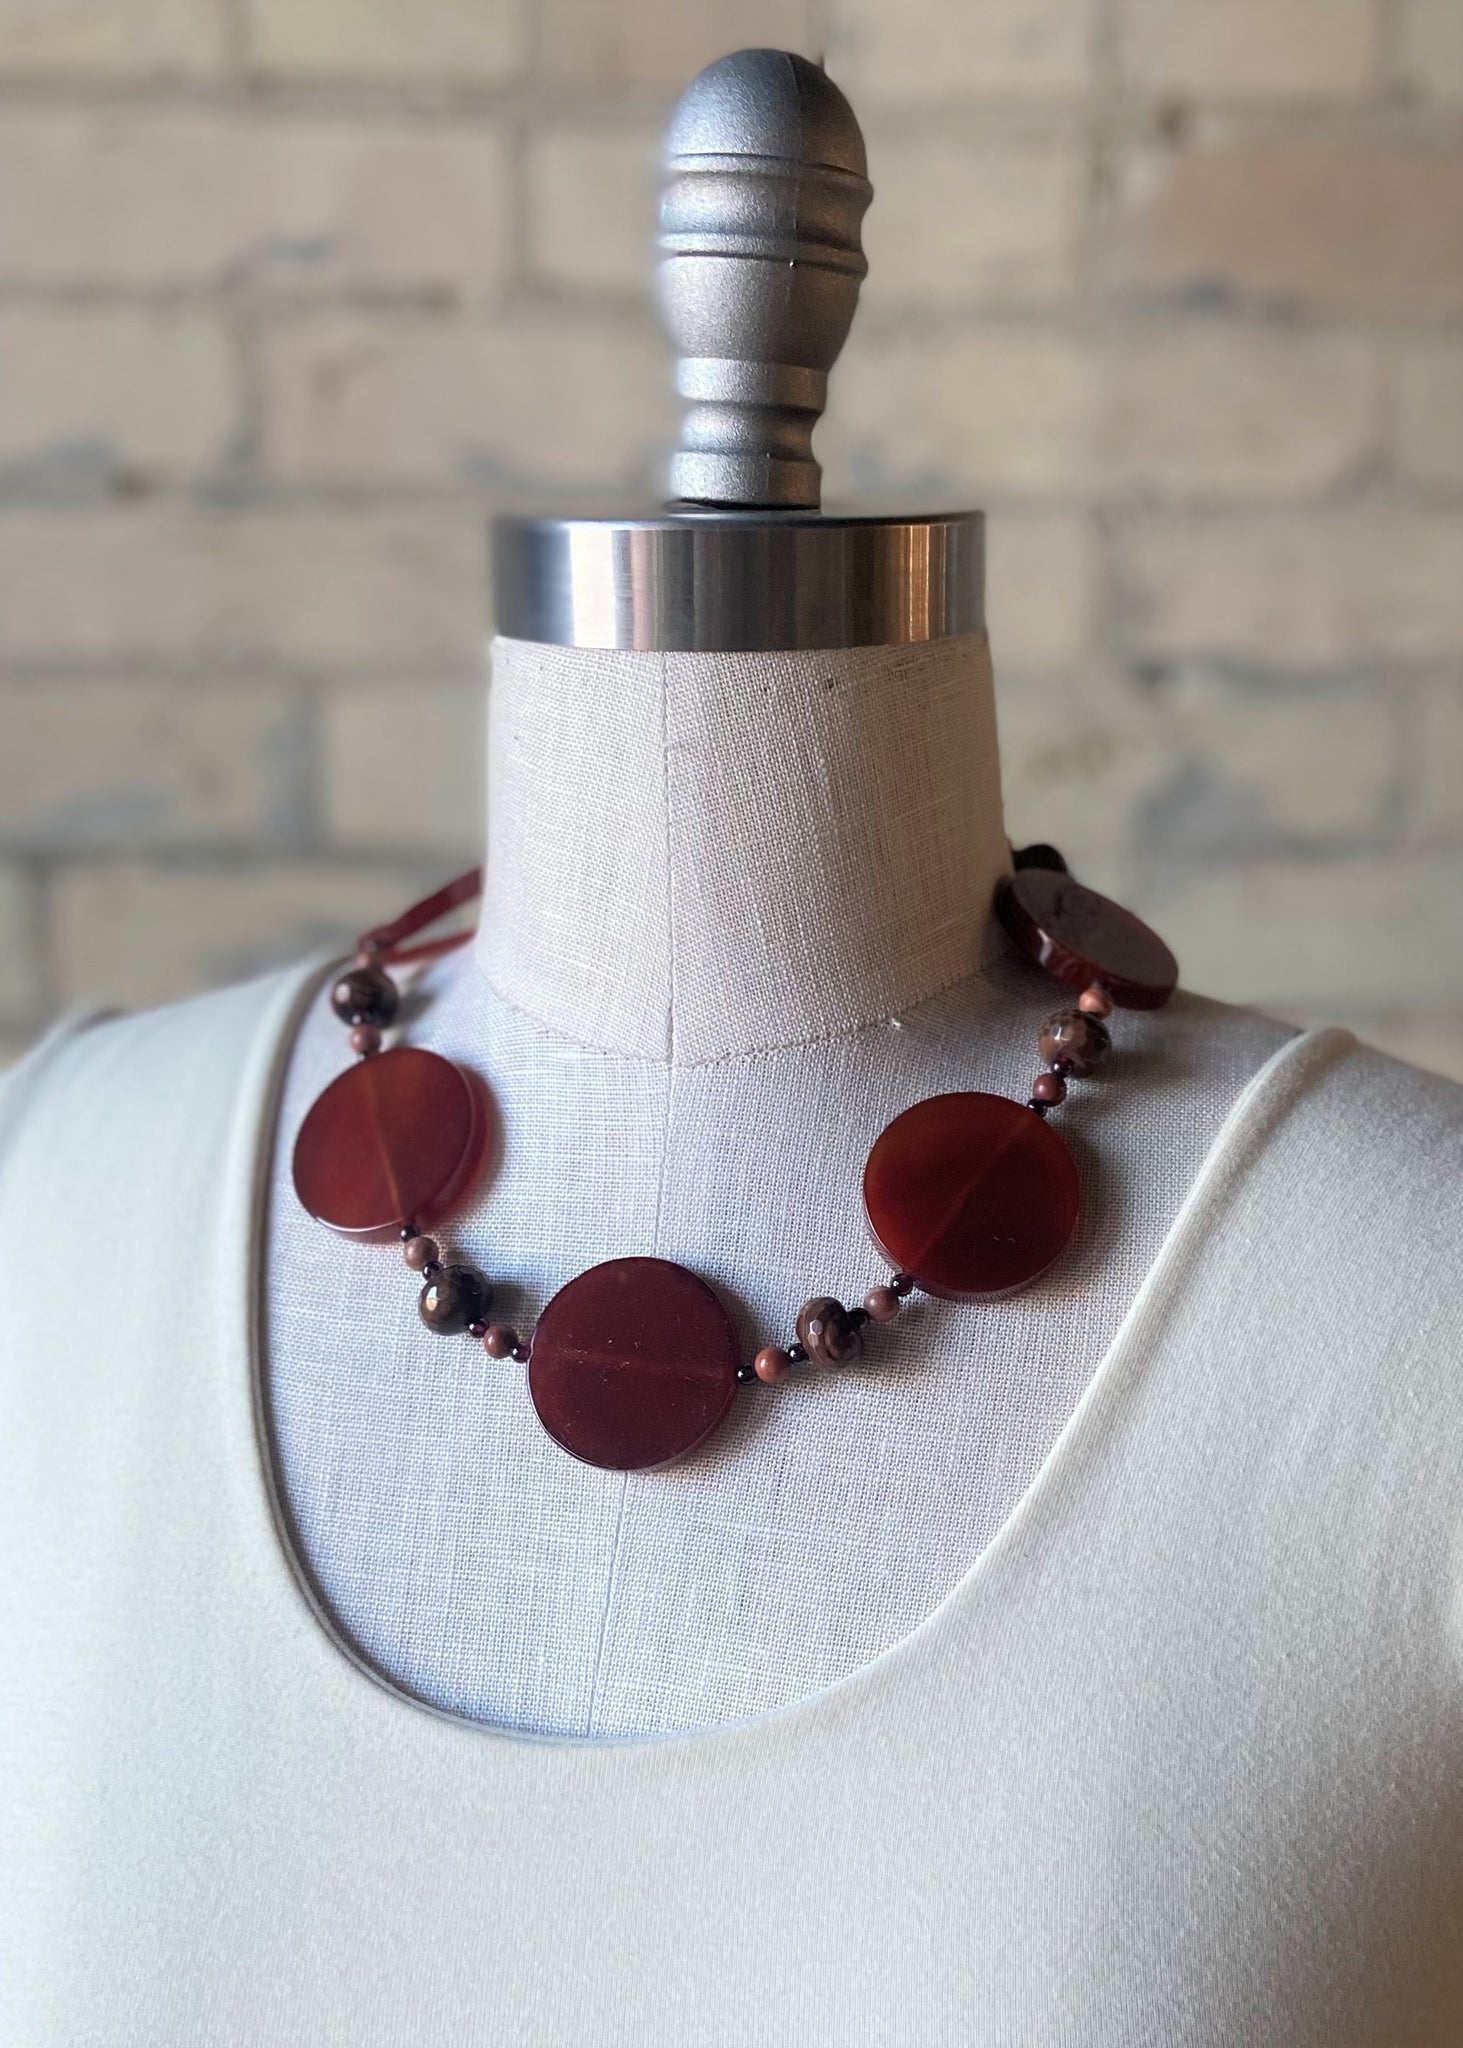 Red Rocks Necklace